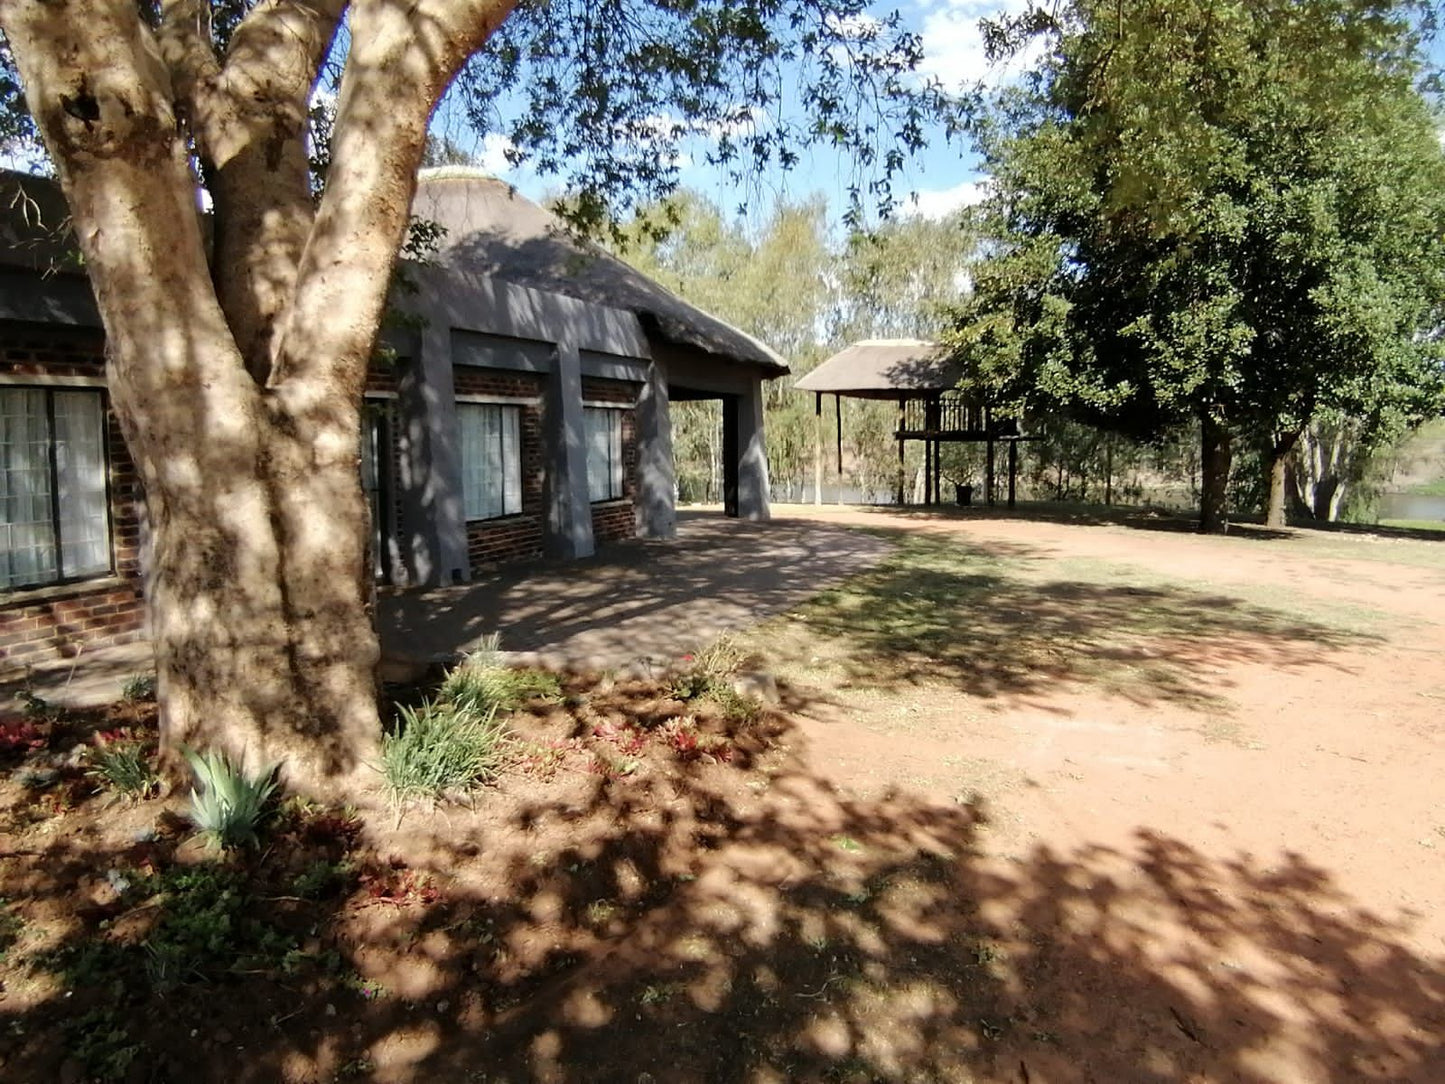 Woelwaters Holiday Resort Lindequesdrif Gauteng South Africa Cabin, Building, Architecture